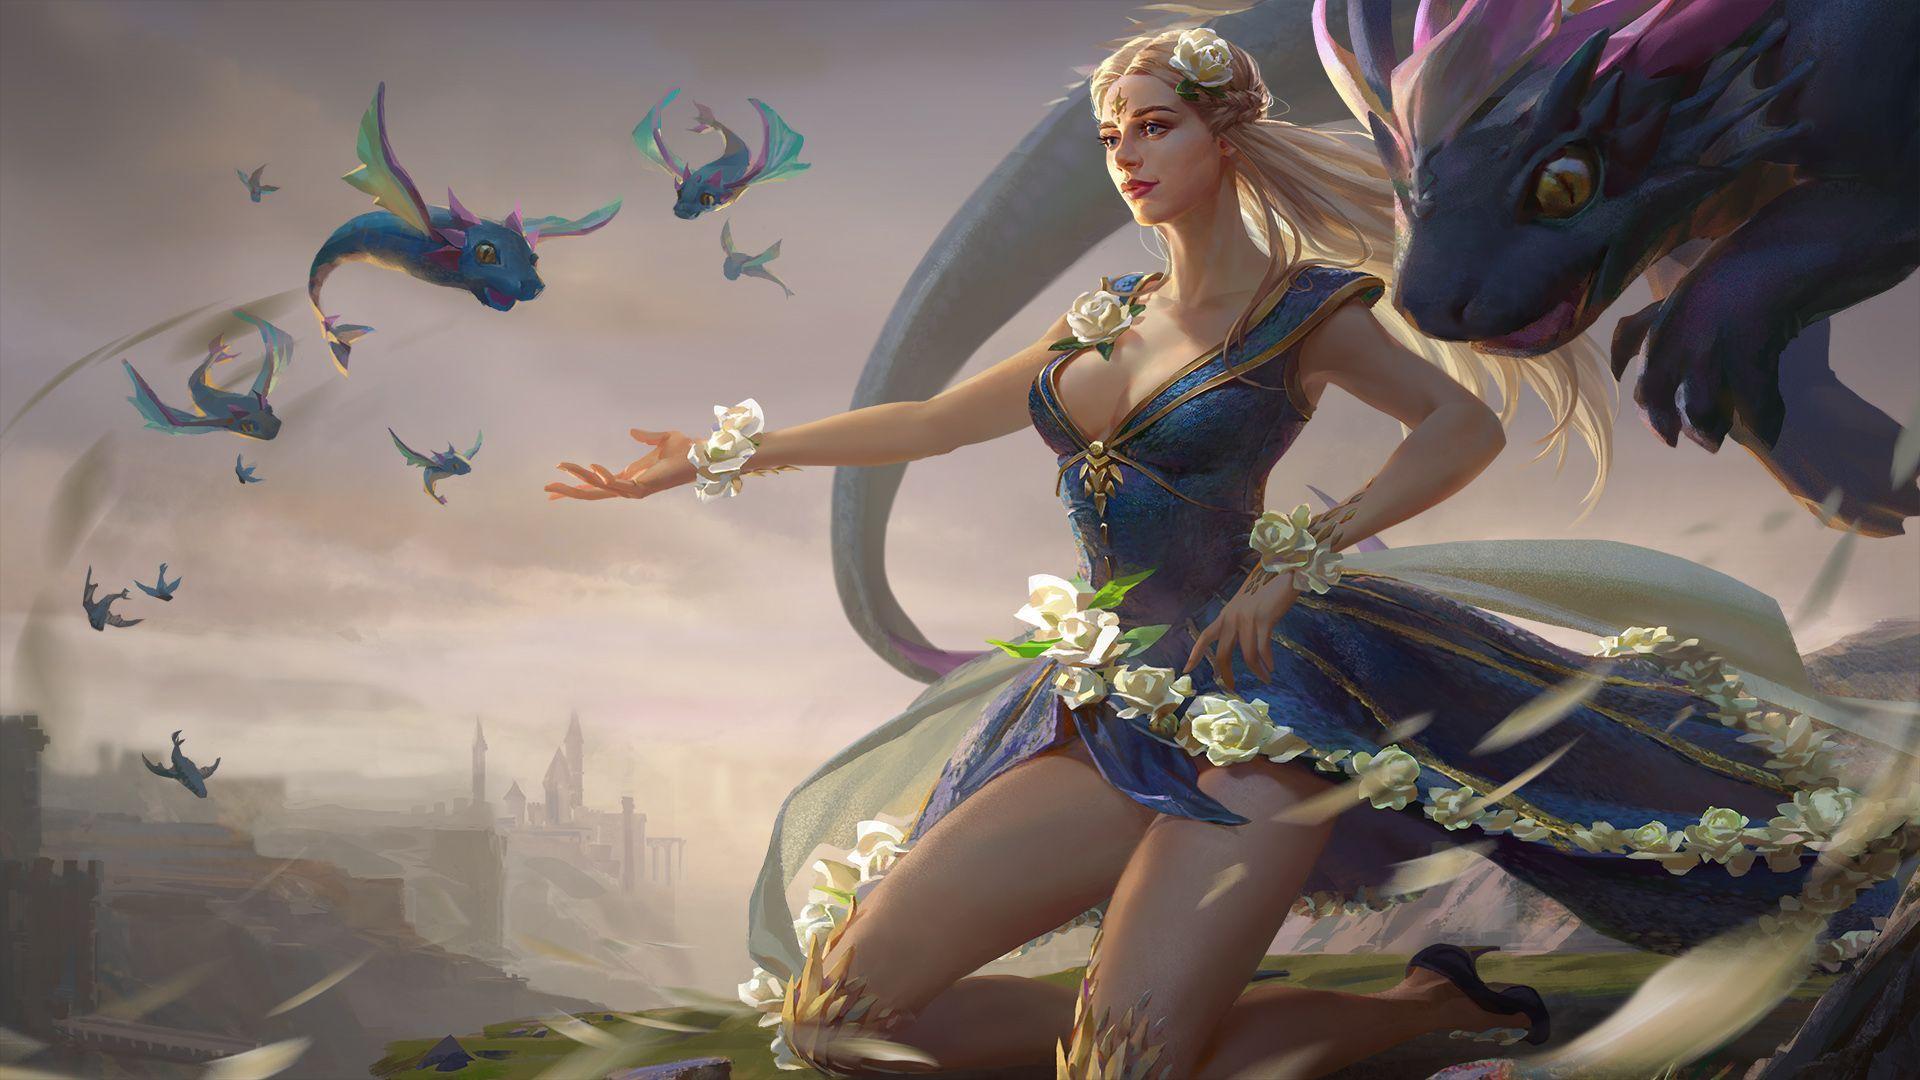 Mother of Dragons Calamity Wallpaper. Heroes of Newerth